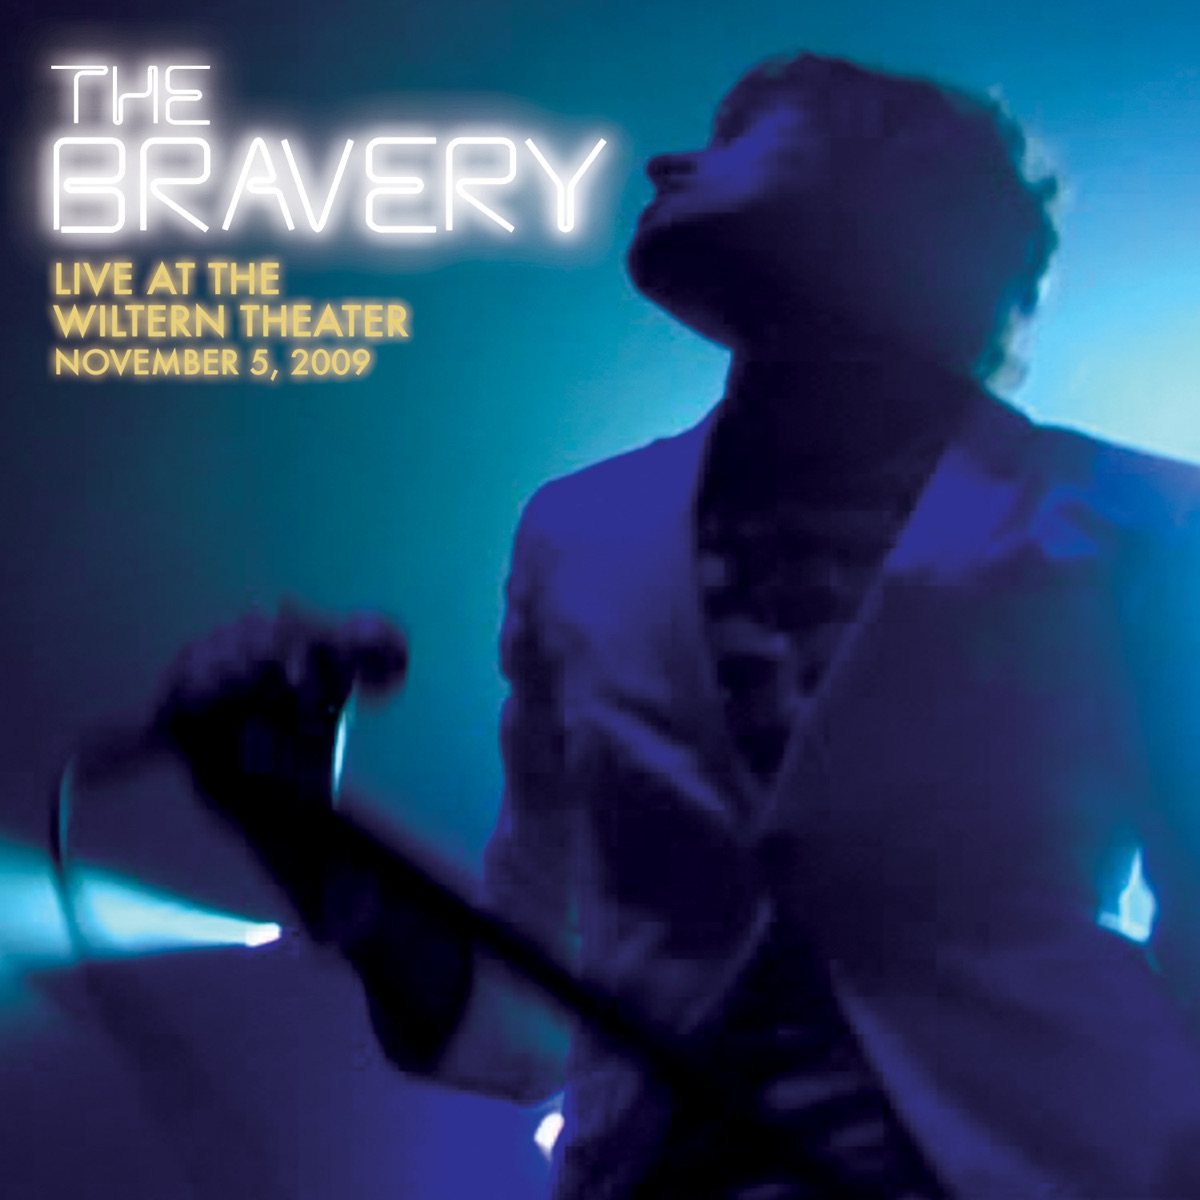 Live At the Wiltern Theater (November 5, 2009) - Album by The Bravery -  Apple Music